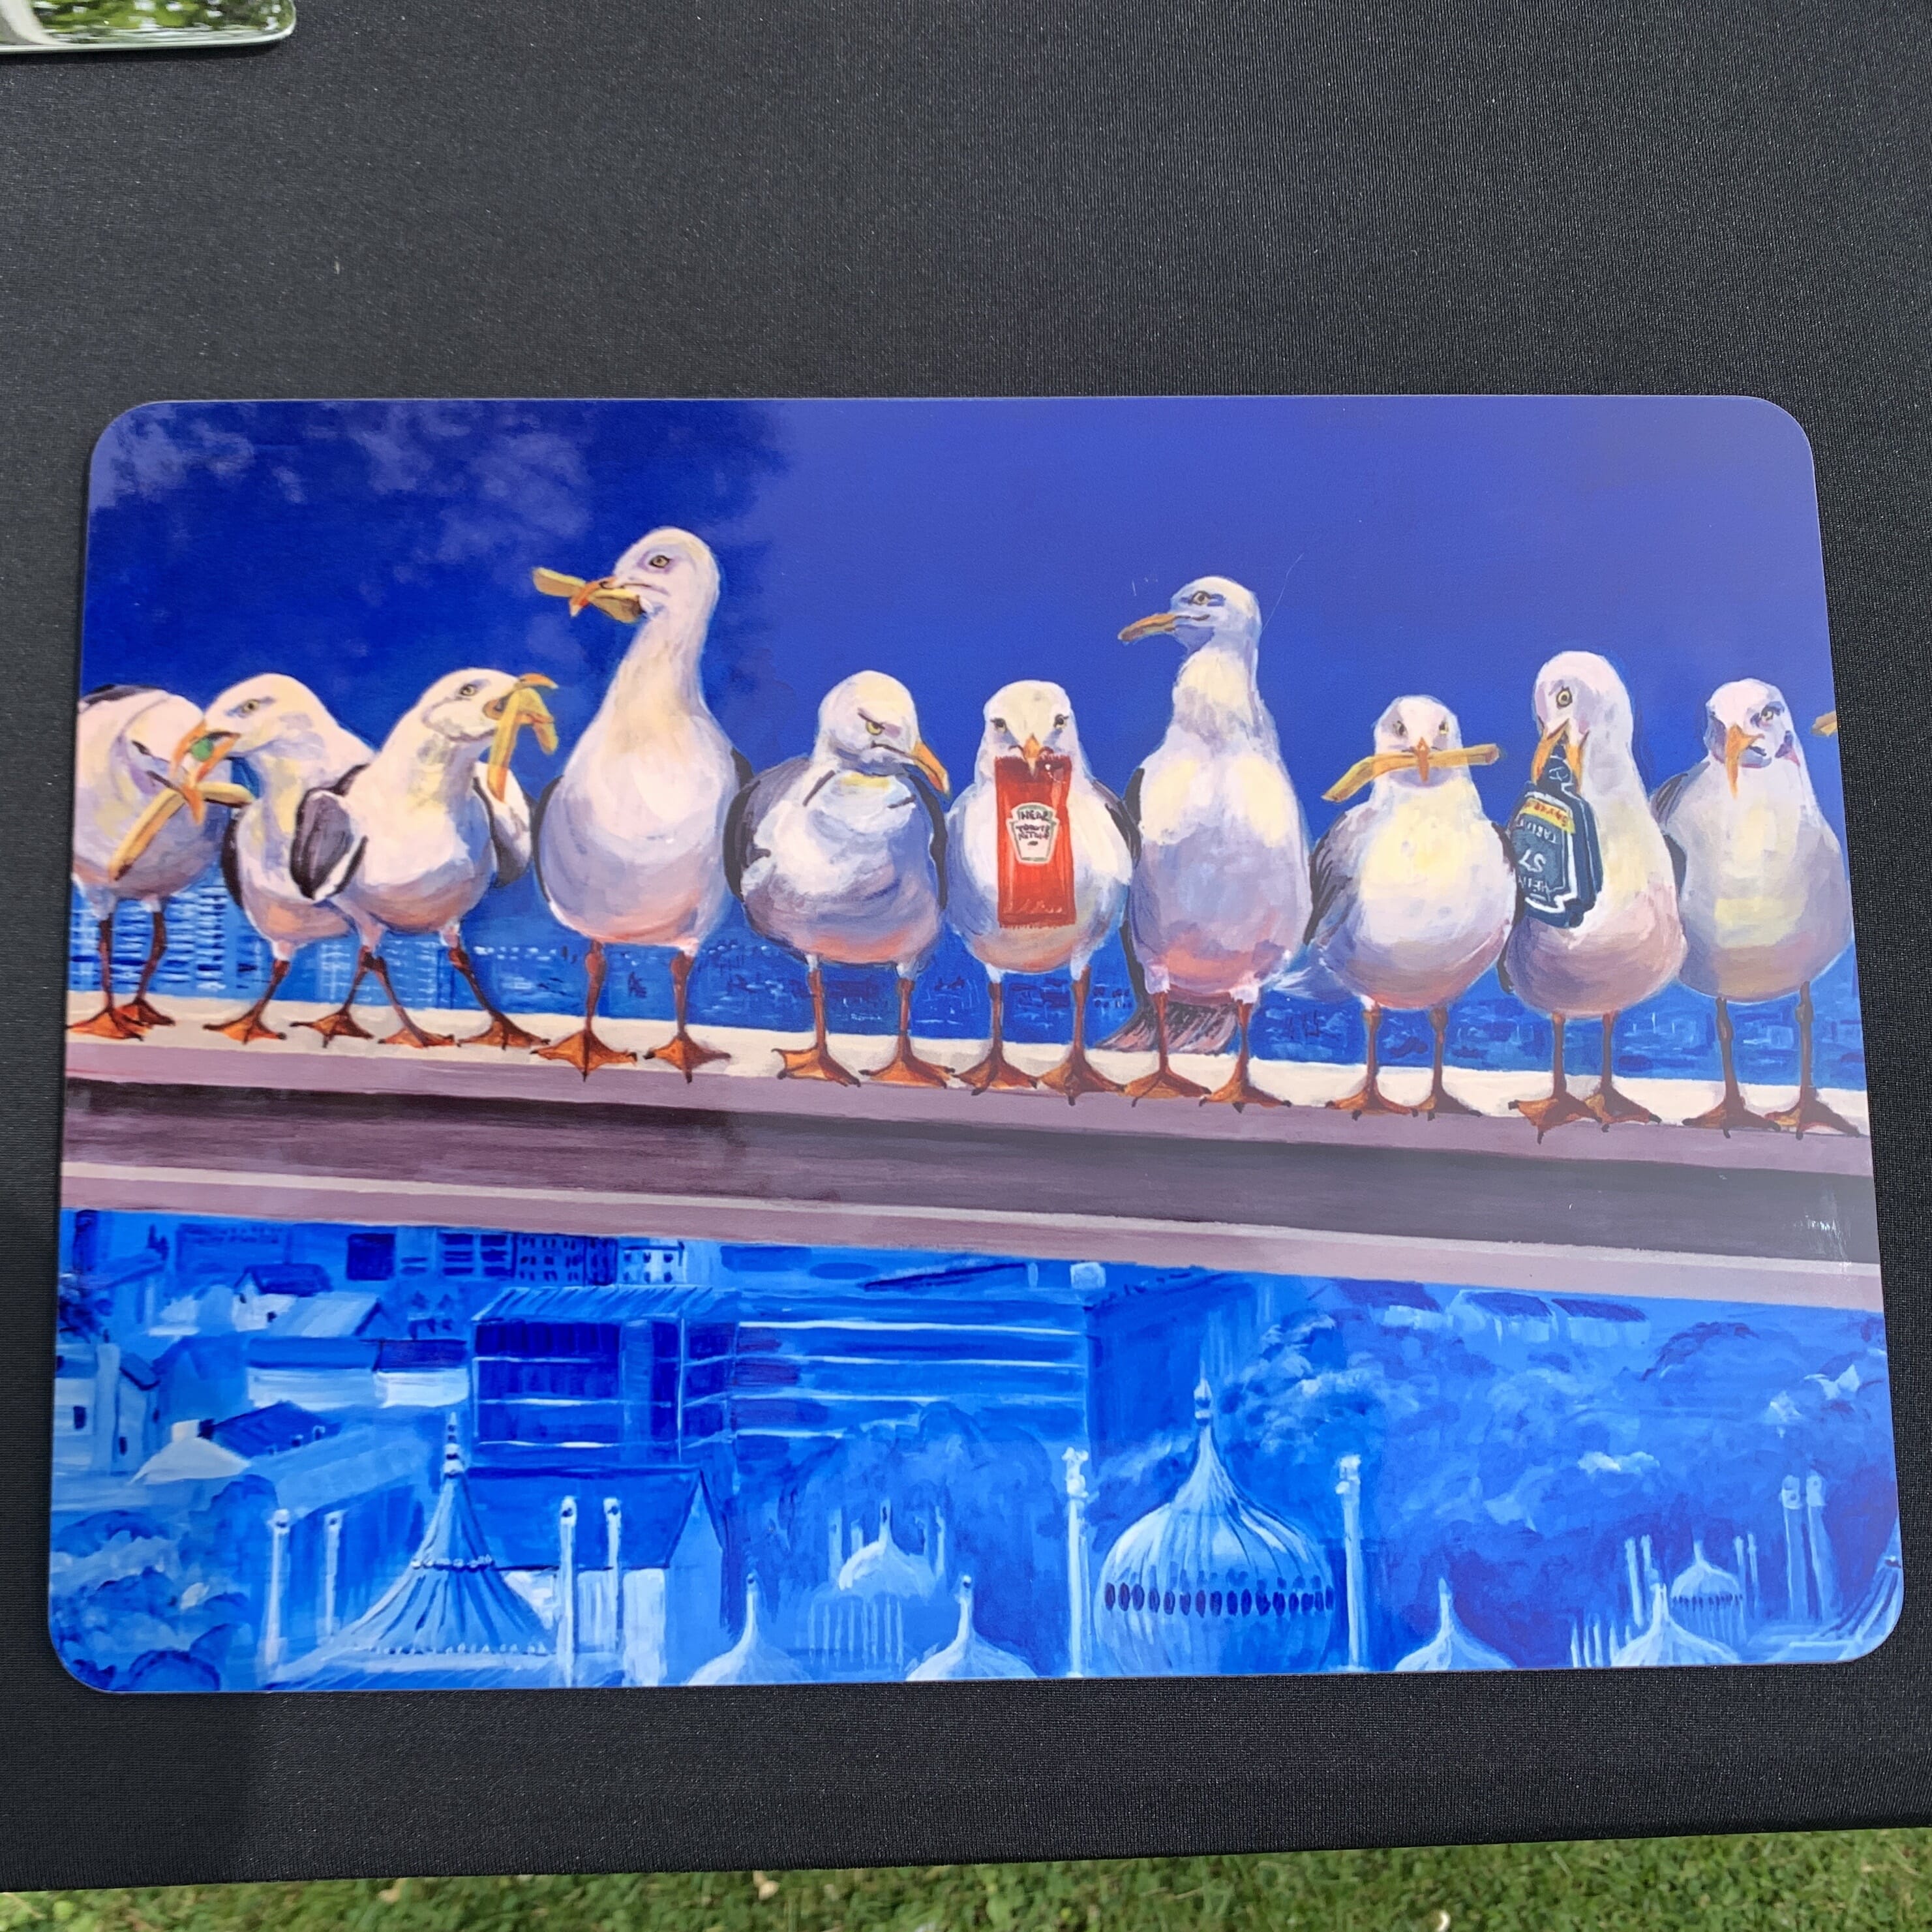 Seagull Art 32cm x 23cm large placemat - Hard Backed, Glossy Finish 